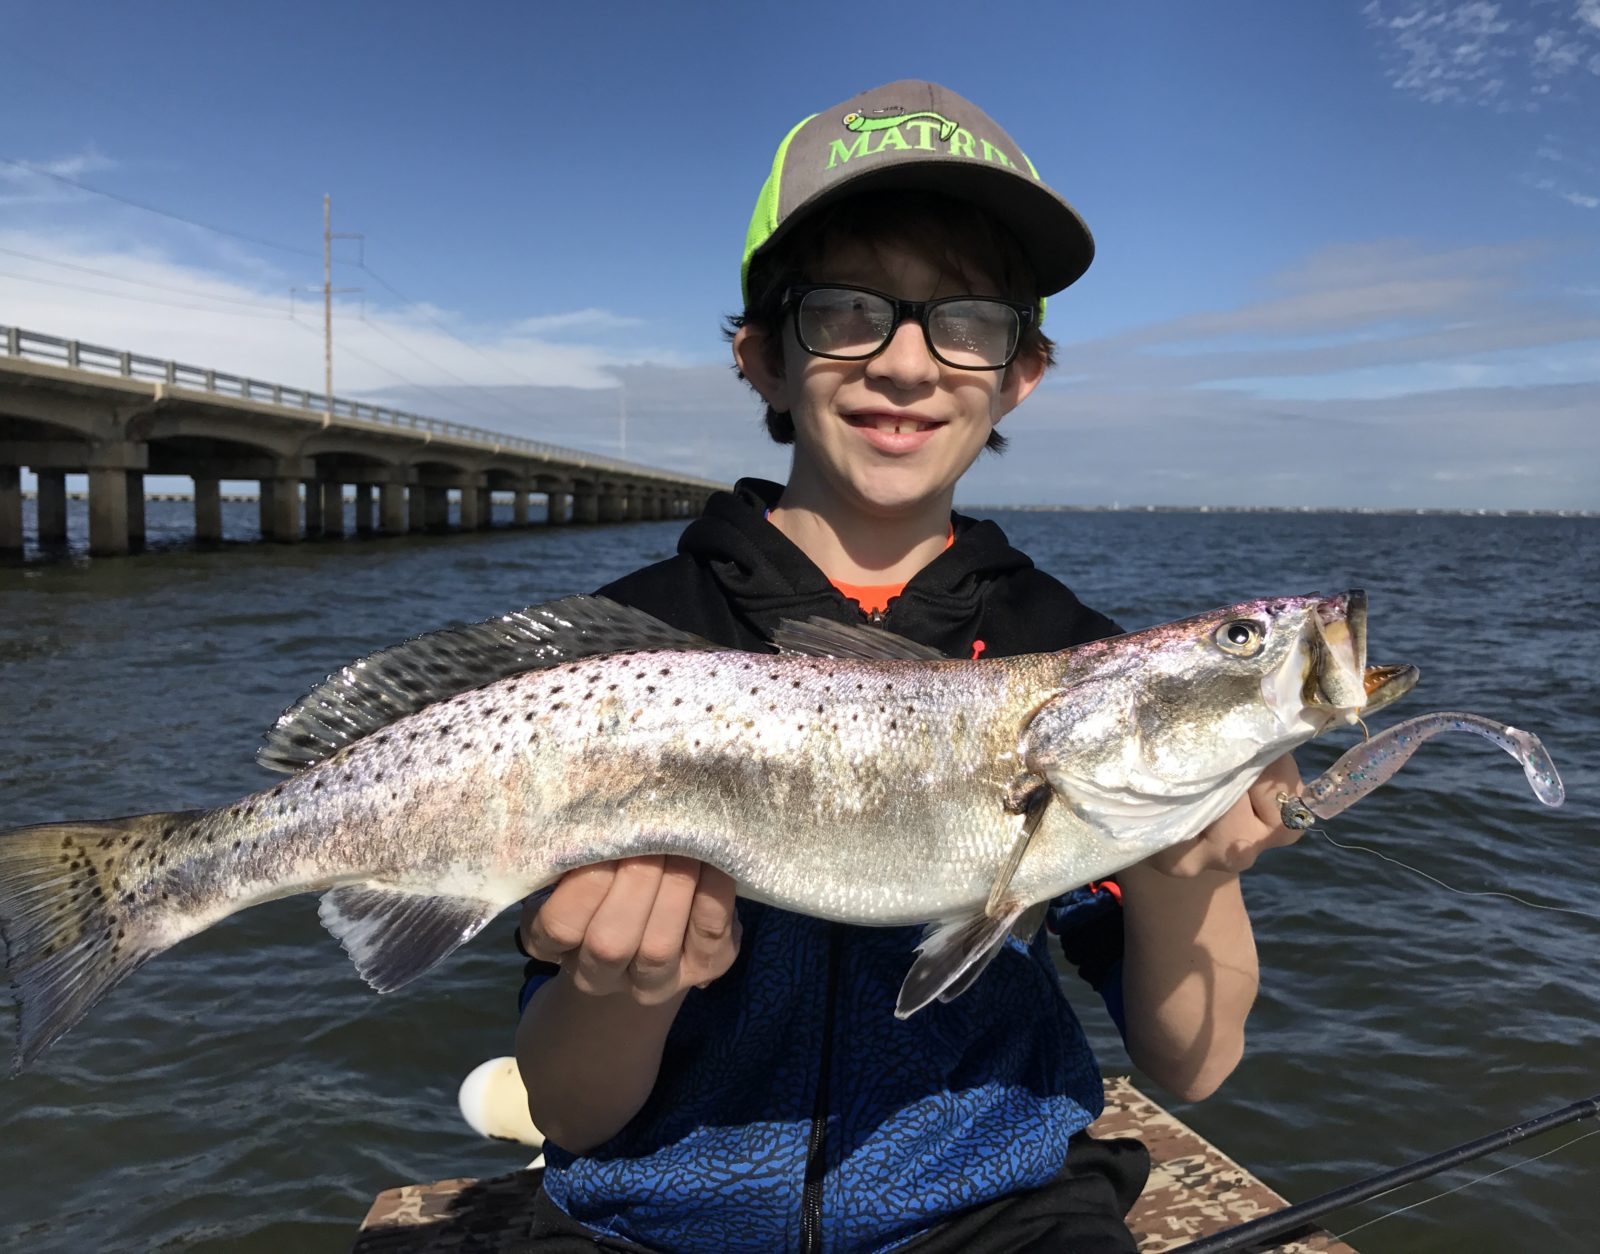 Targeting Trophy Trout (With Video) - Matrix Shad